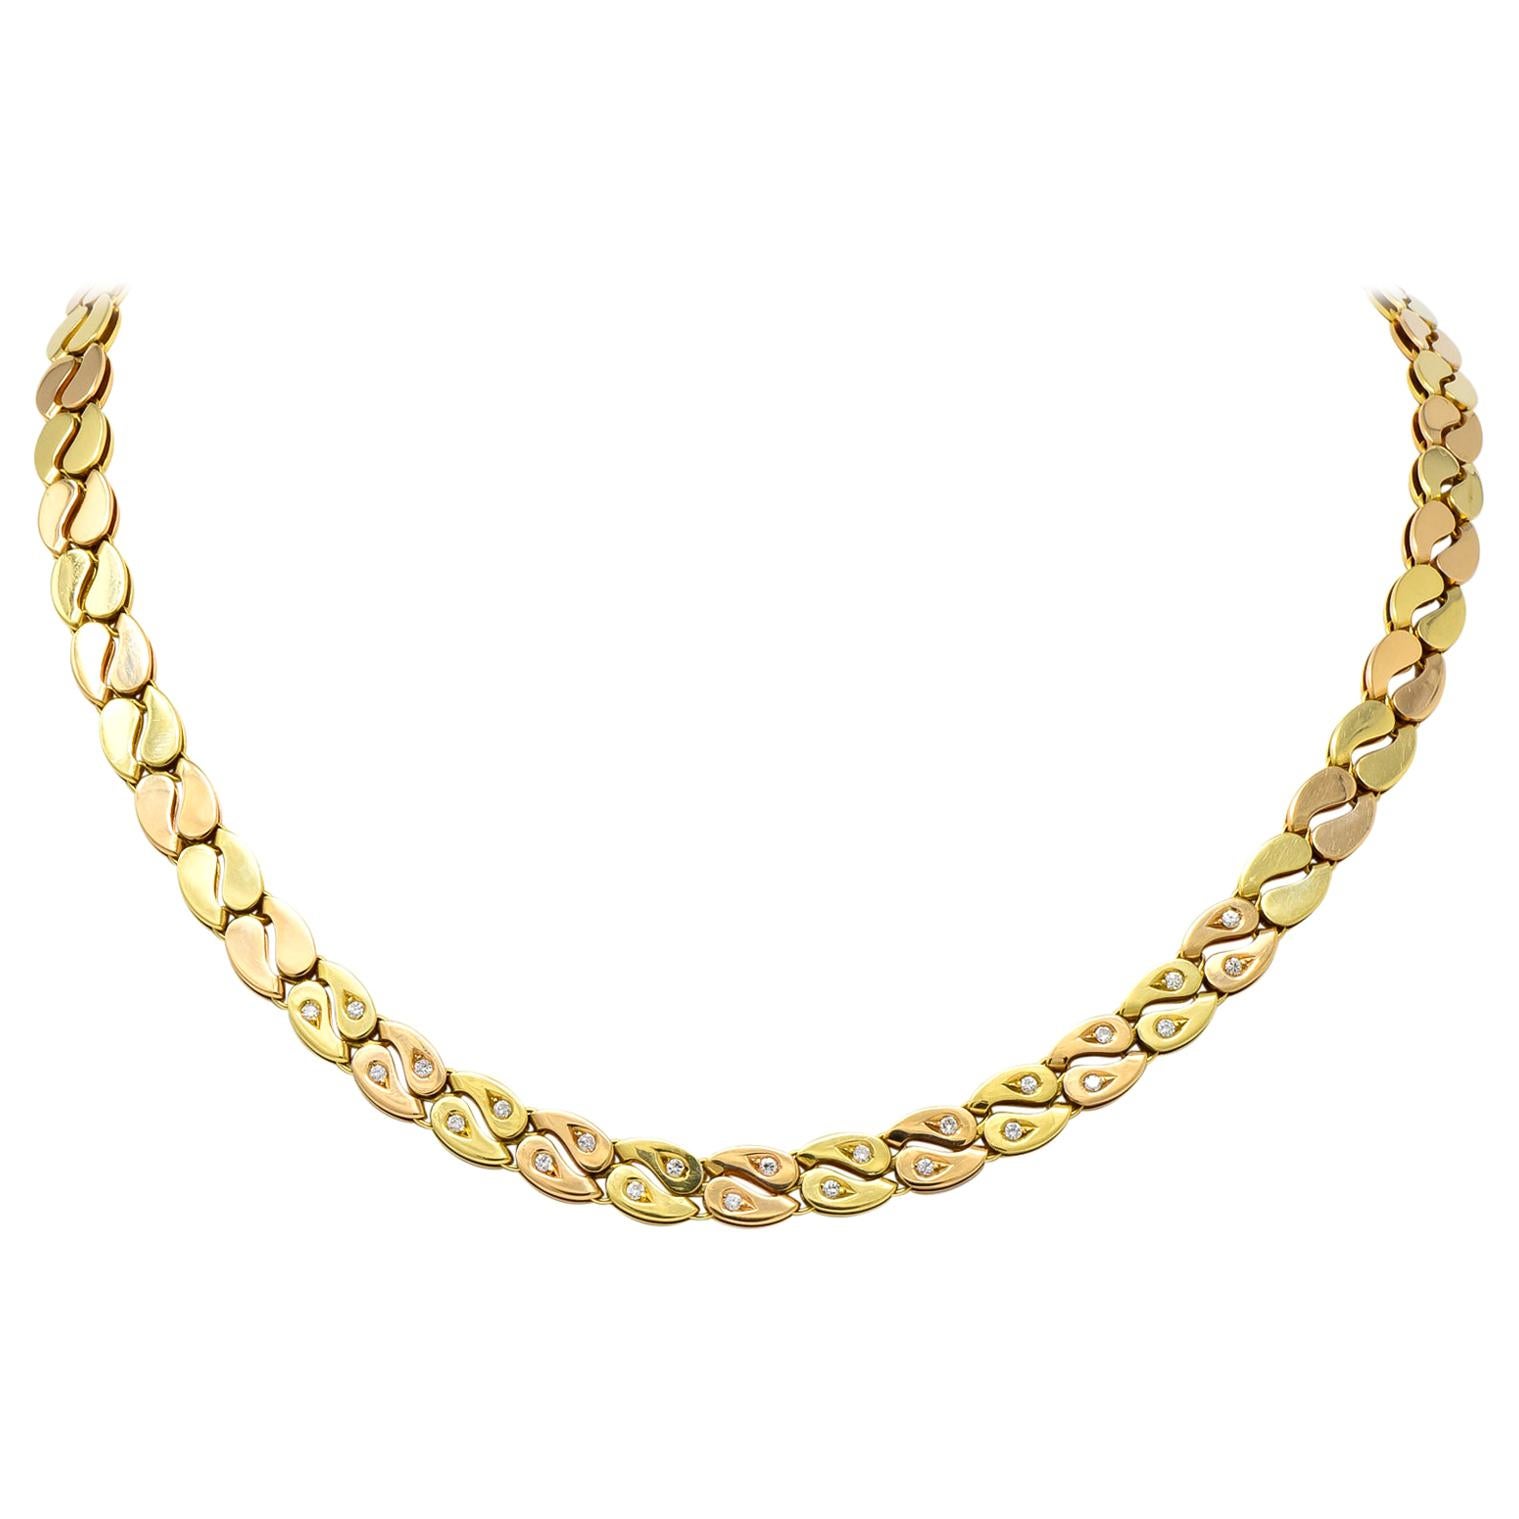 Black Starr and Frost Retro 18 Karat Two-Tone Gold Collar Link Necklace